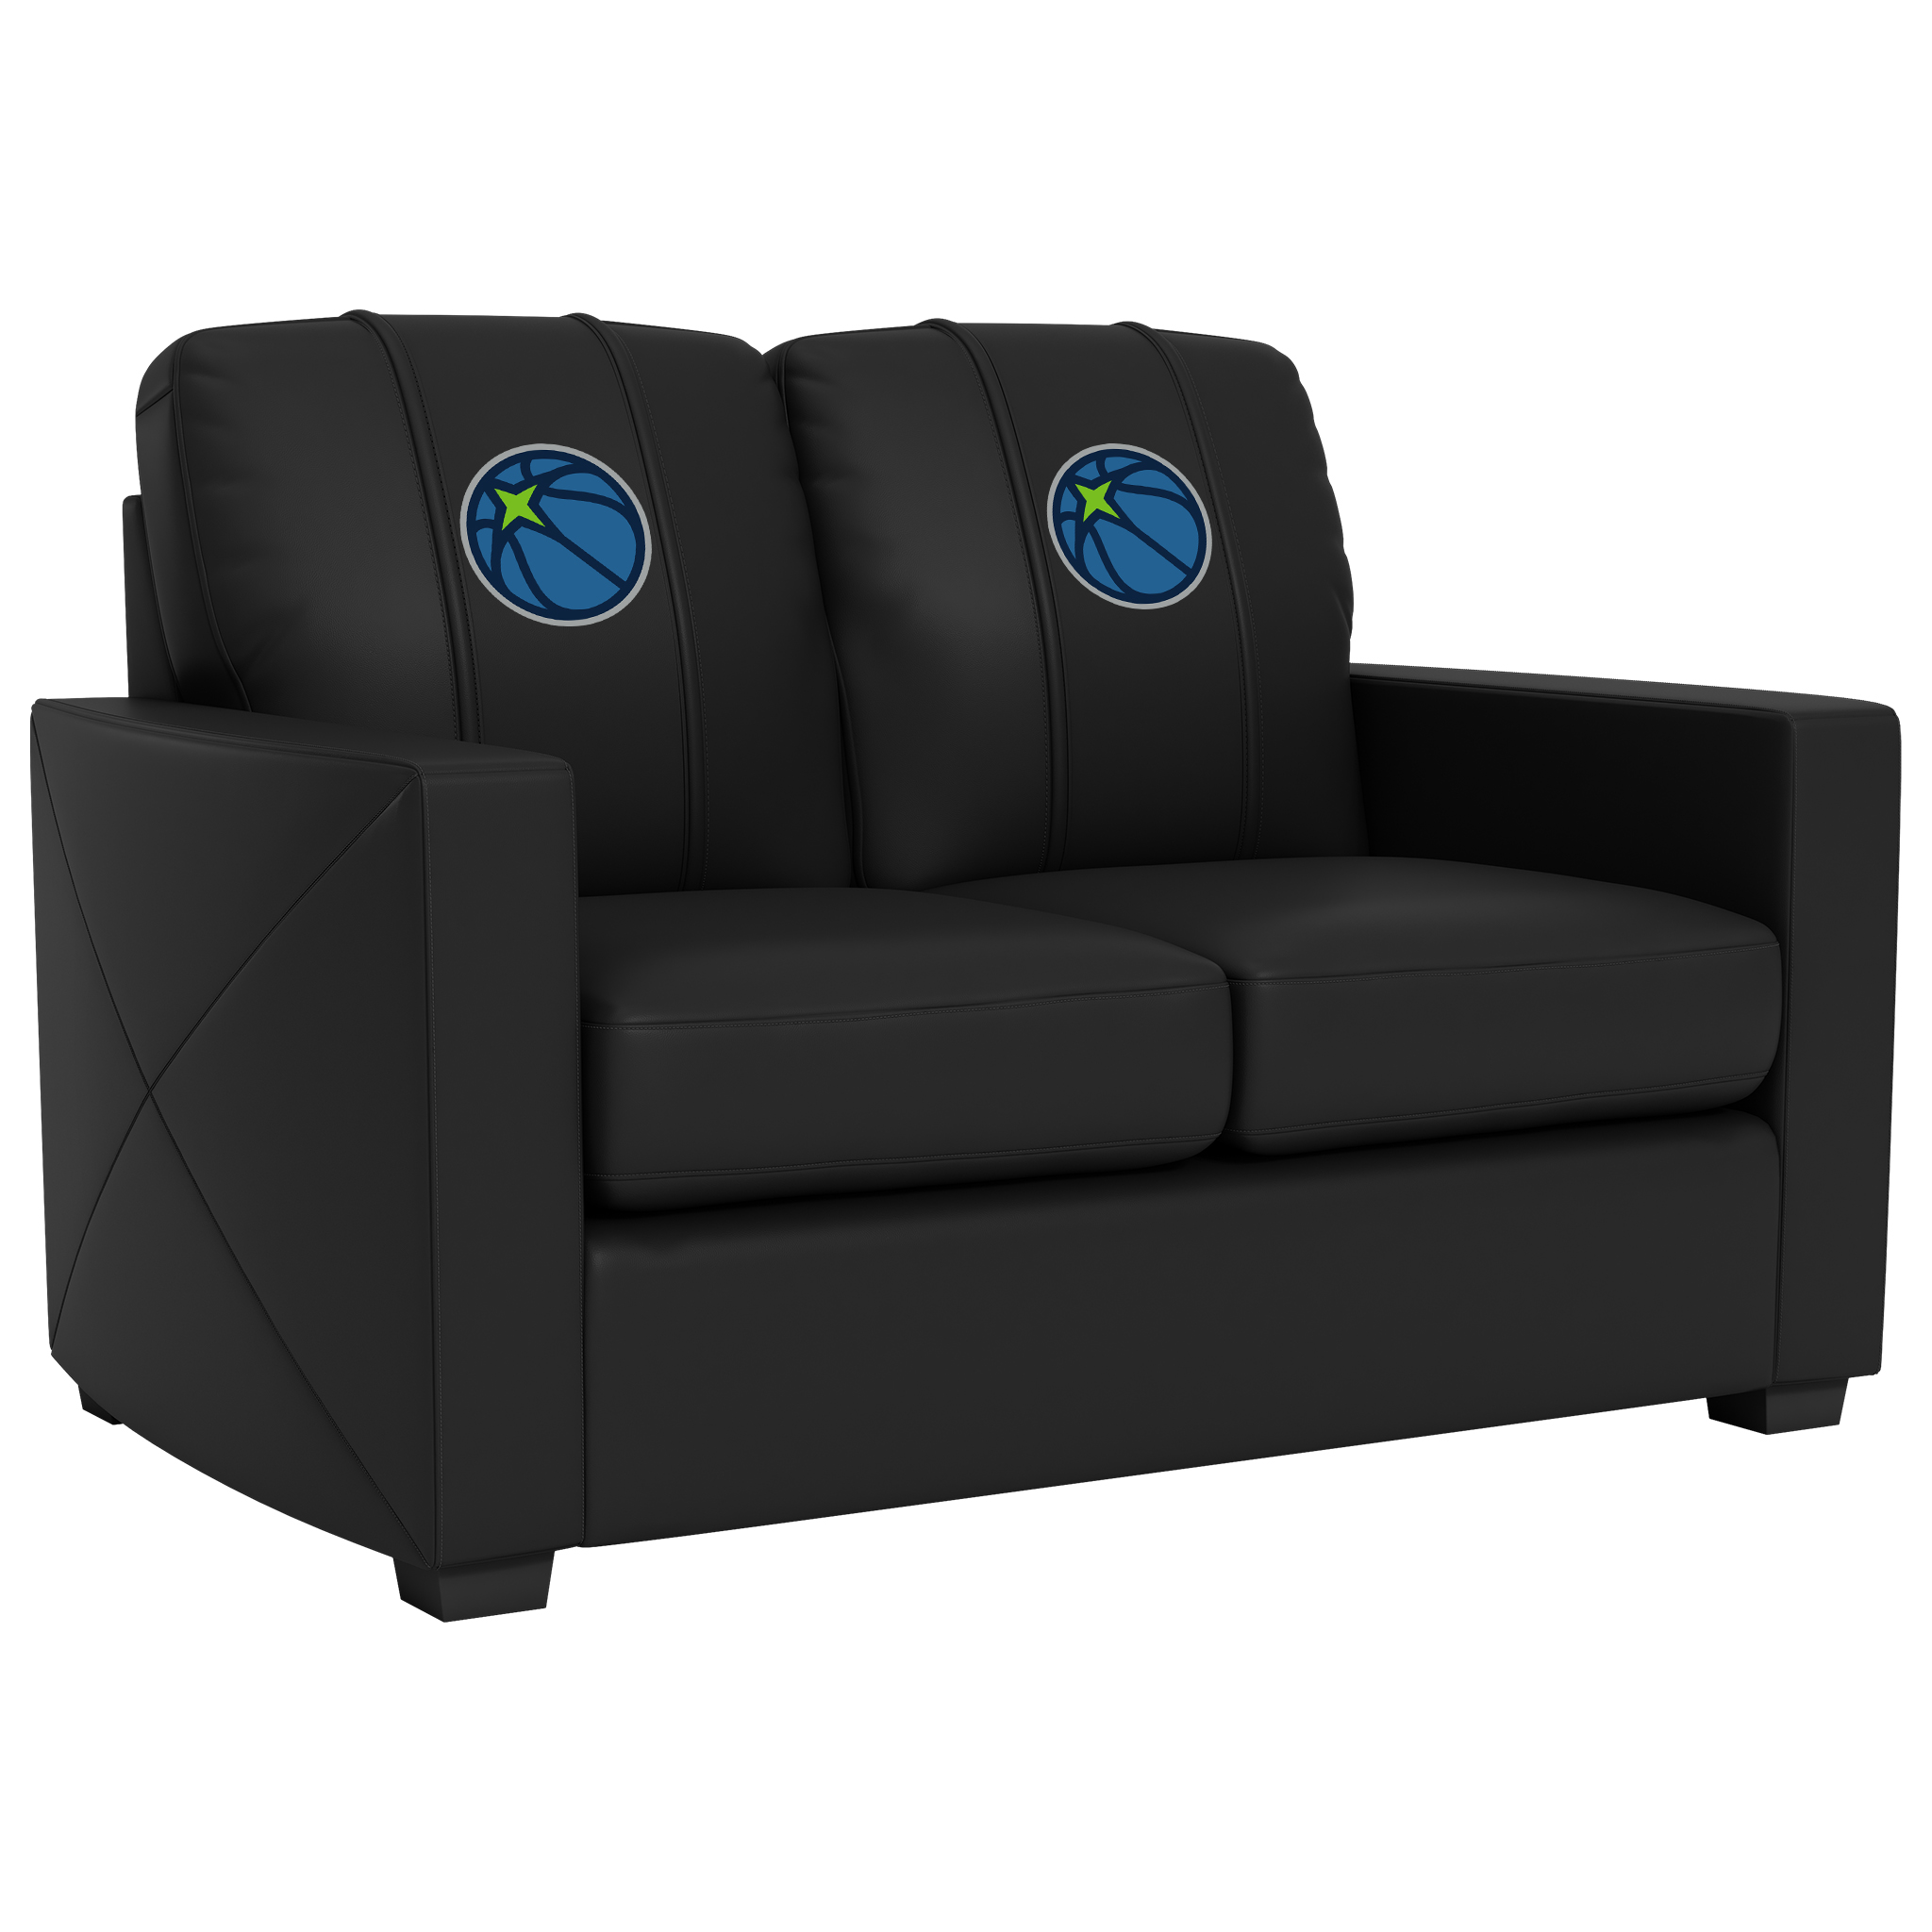 Minnesota Timberwolves  Silver Loveseat with Minnesota Timberwolves Secondary Logo